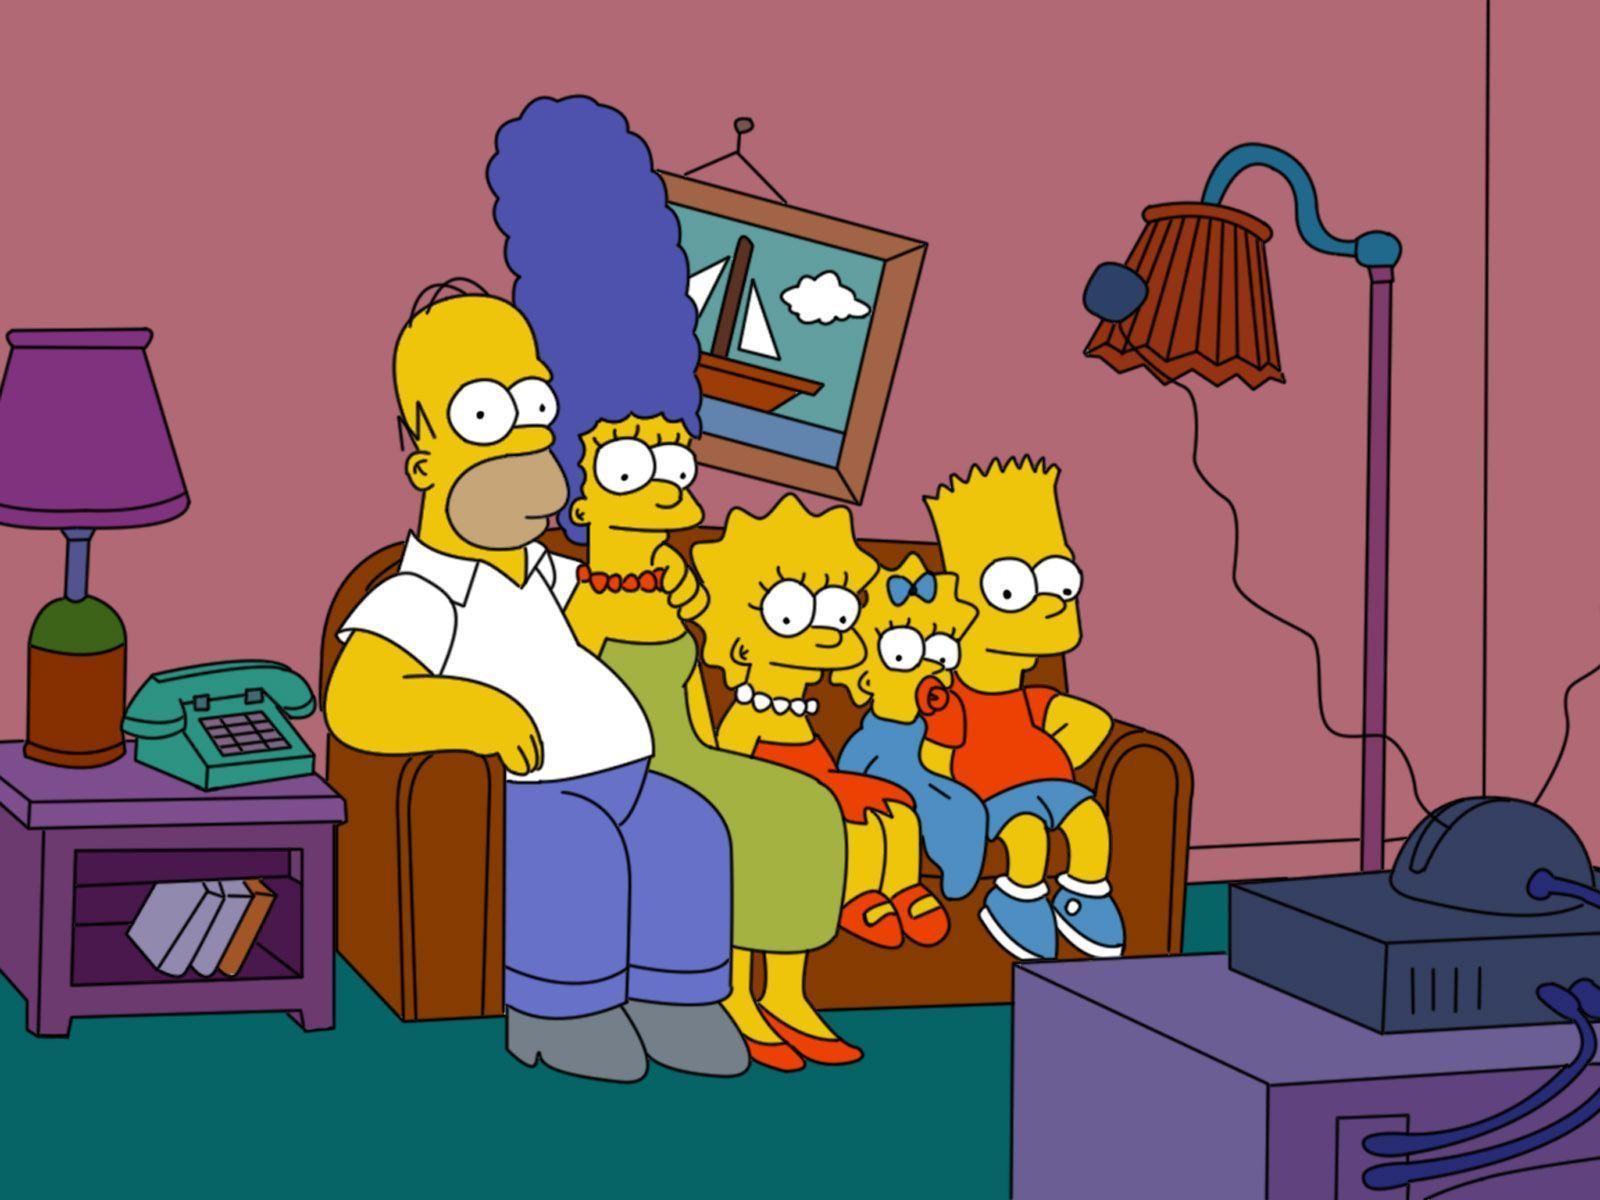 The Simpsons on the Couch Background For Free Download. Cartoons